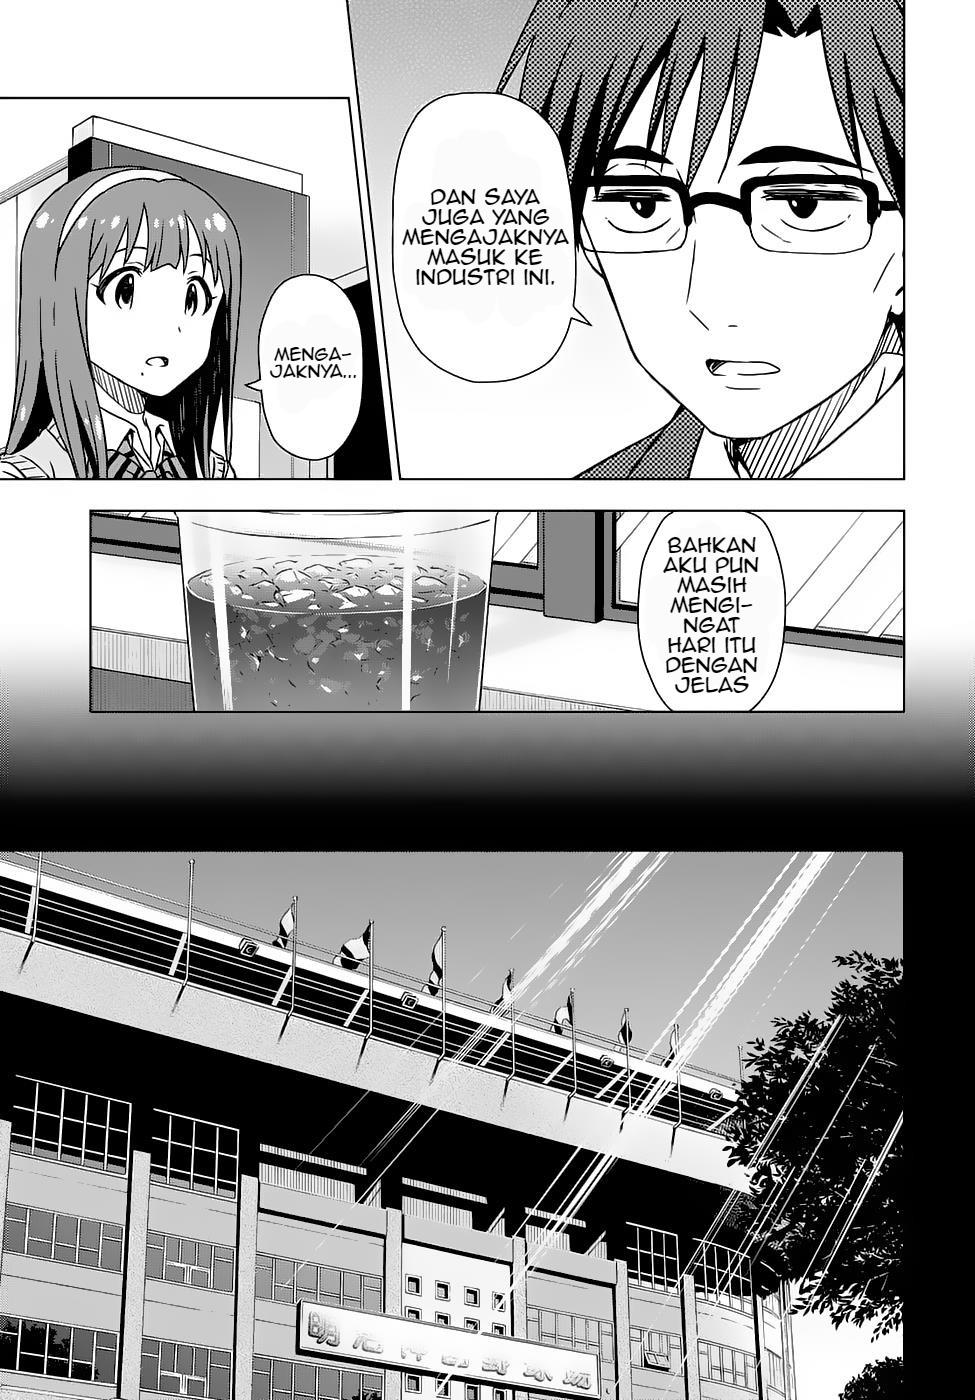 Morning Glow is Golden: The IDOLM@STER Chapter 3.2